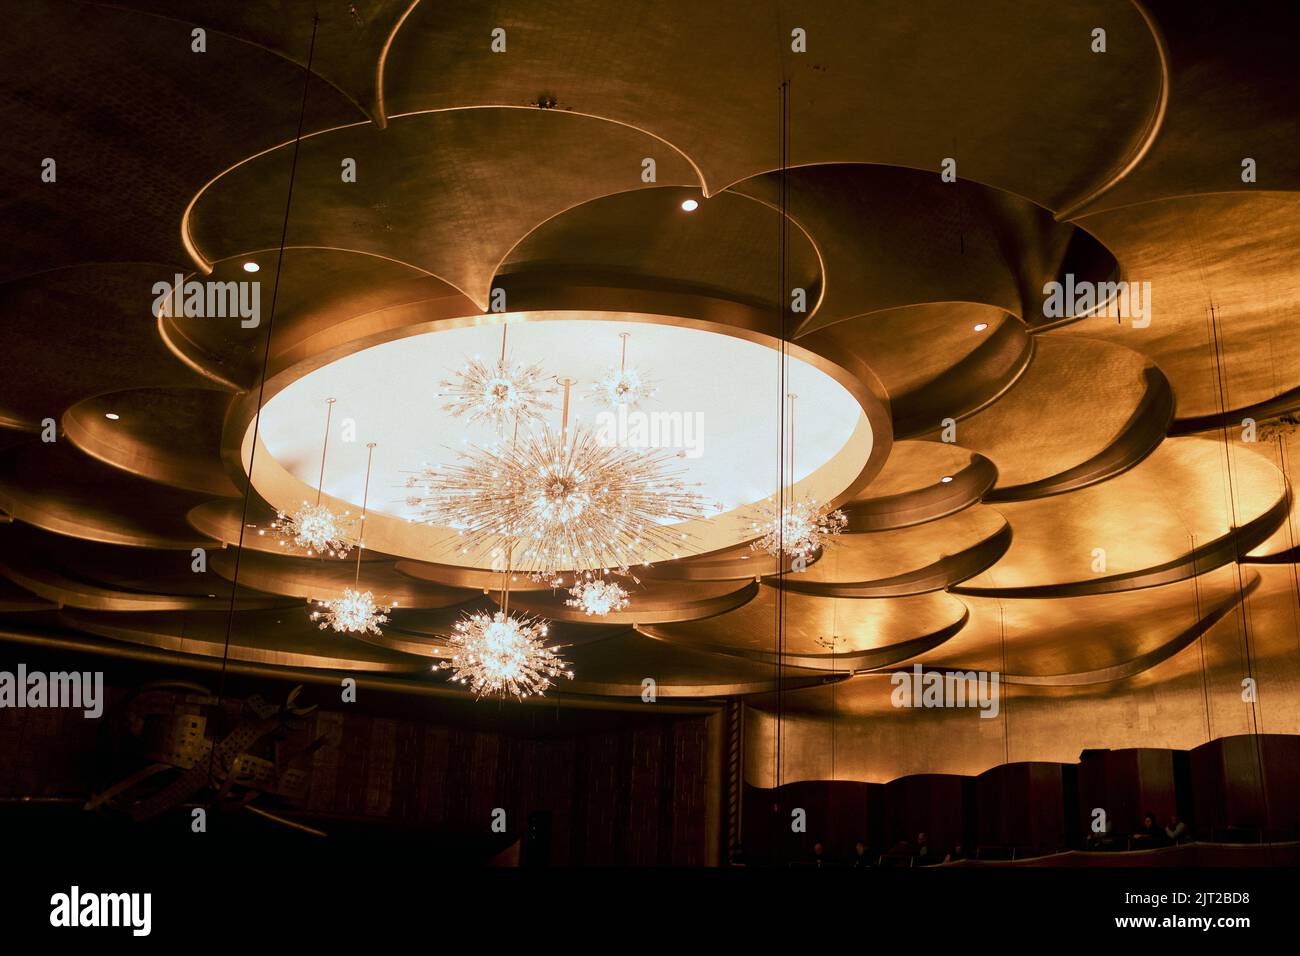 Chandeliers and Ceiling, Metropolitan Opera House, Lincoln Center, New York City, New York, USA Stock Photo